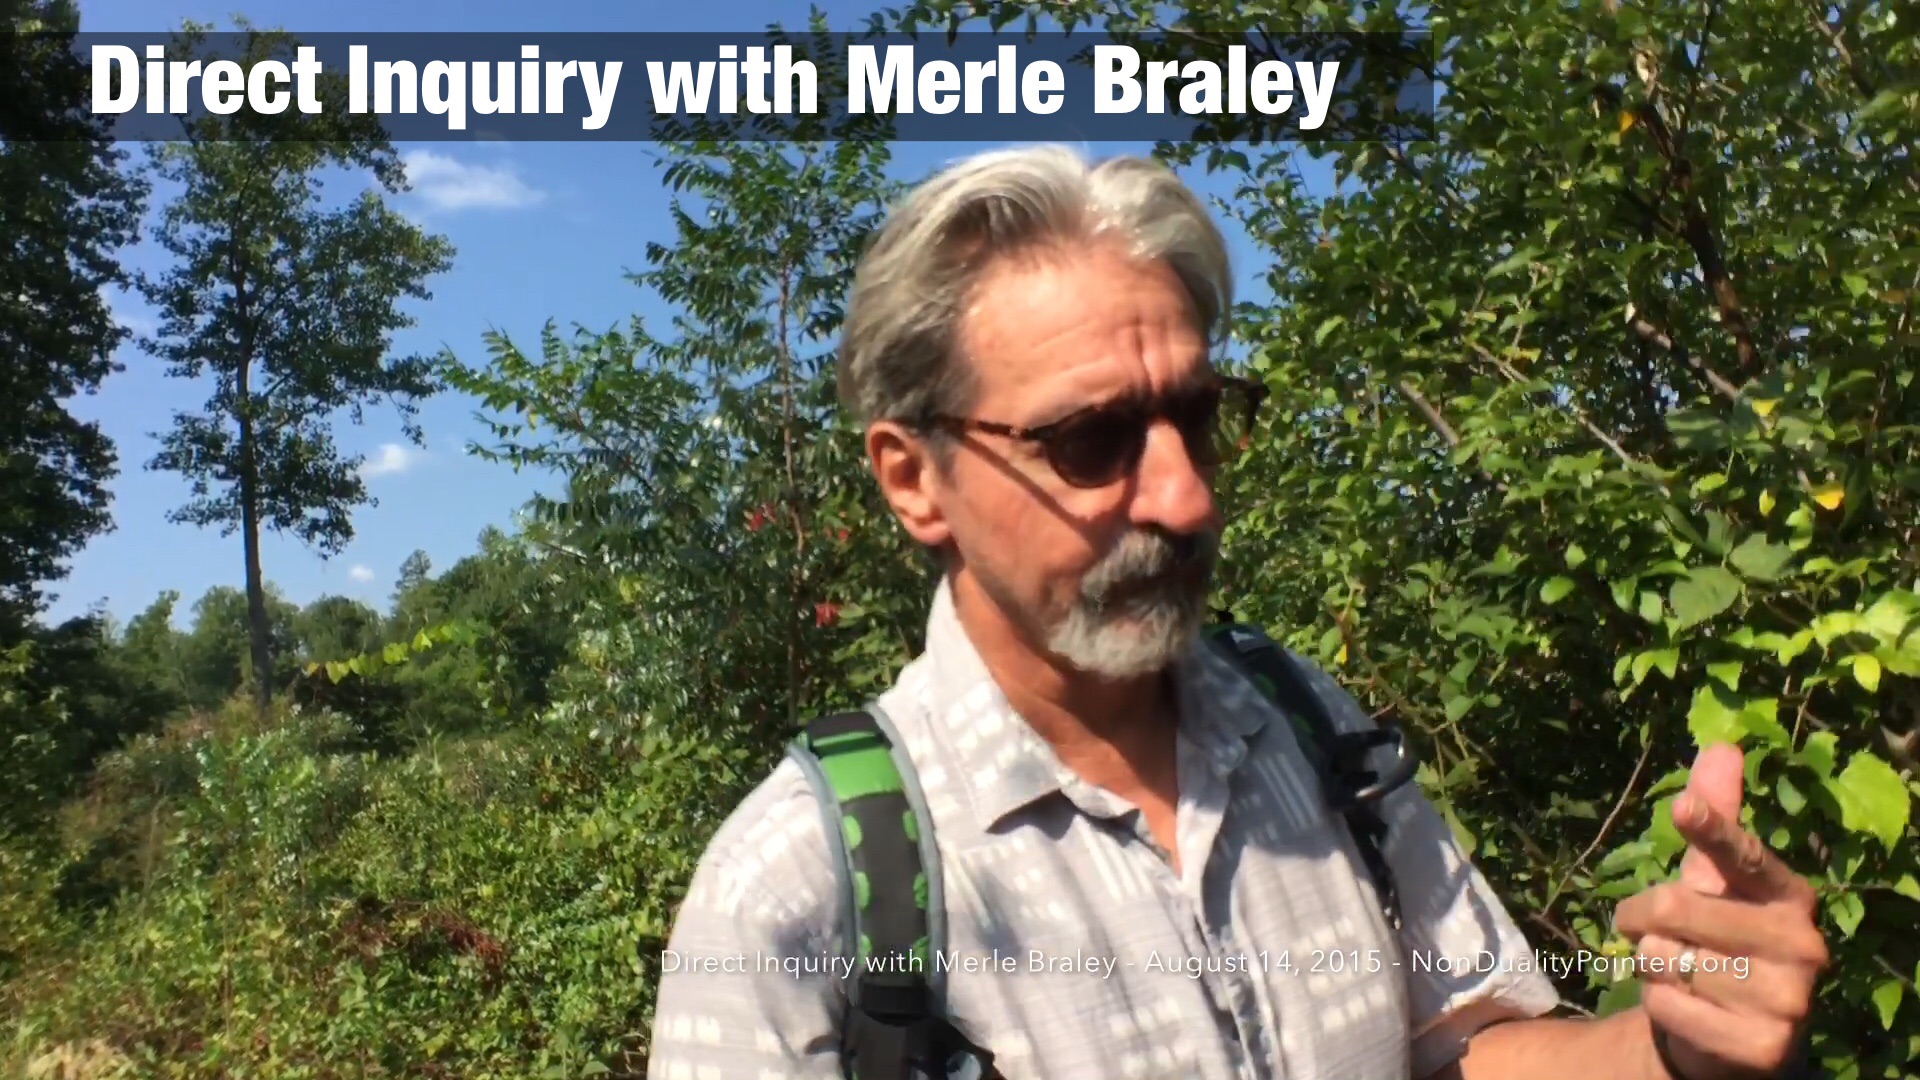 Direct Inquiry with Merle Braley August 14 2015